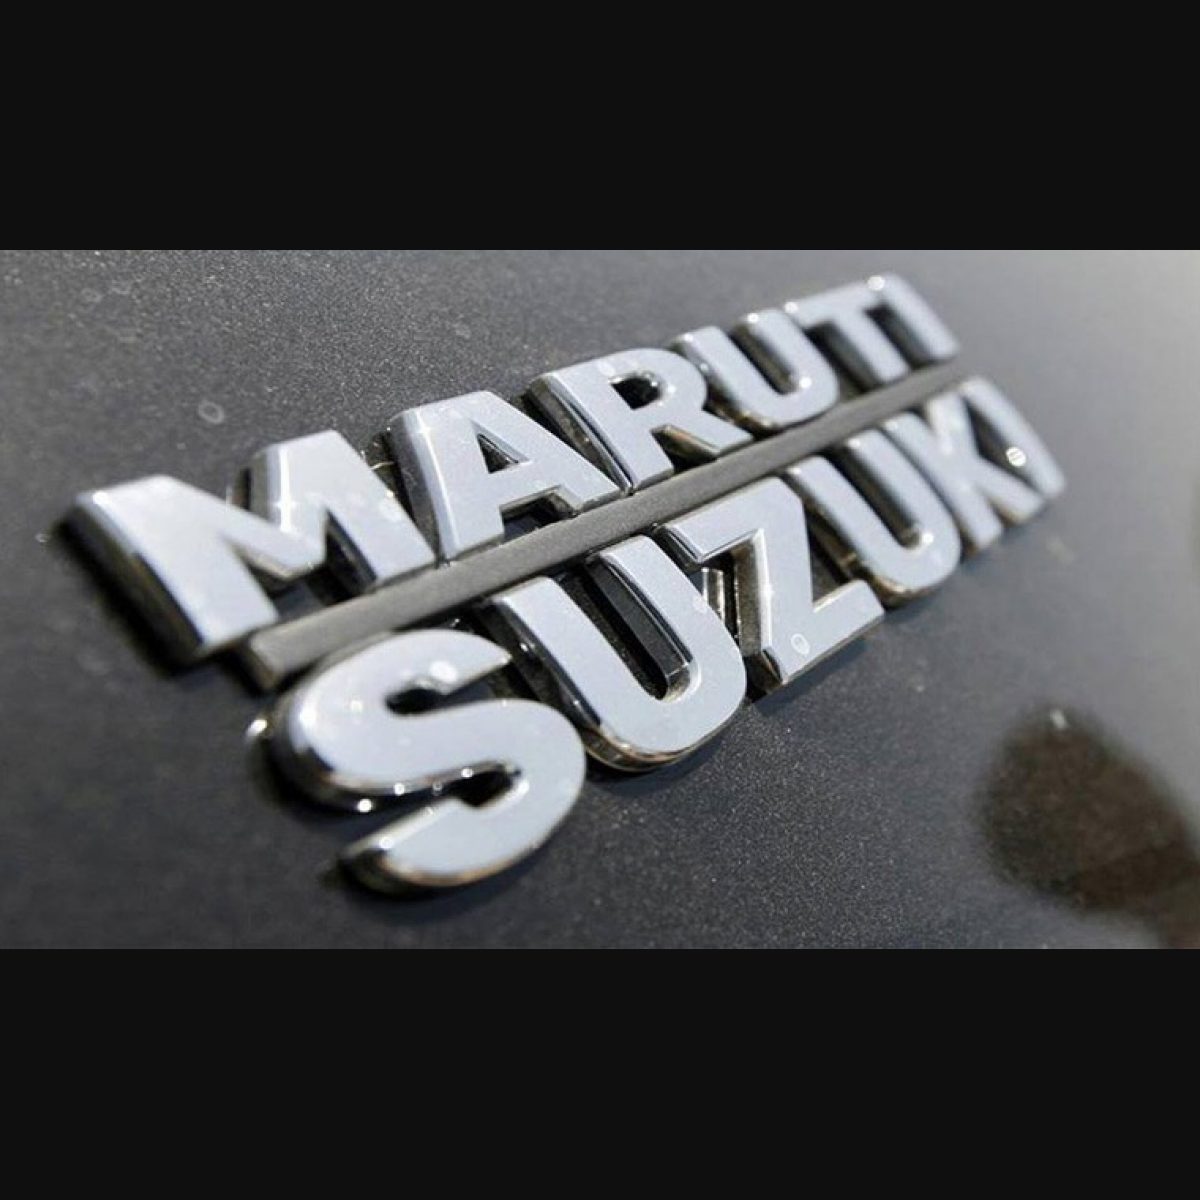 Maruti Suzuki Swift was India's largest-selling car in 2020 with sales of  over 1.60 lakh units